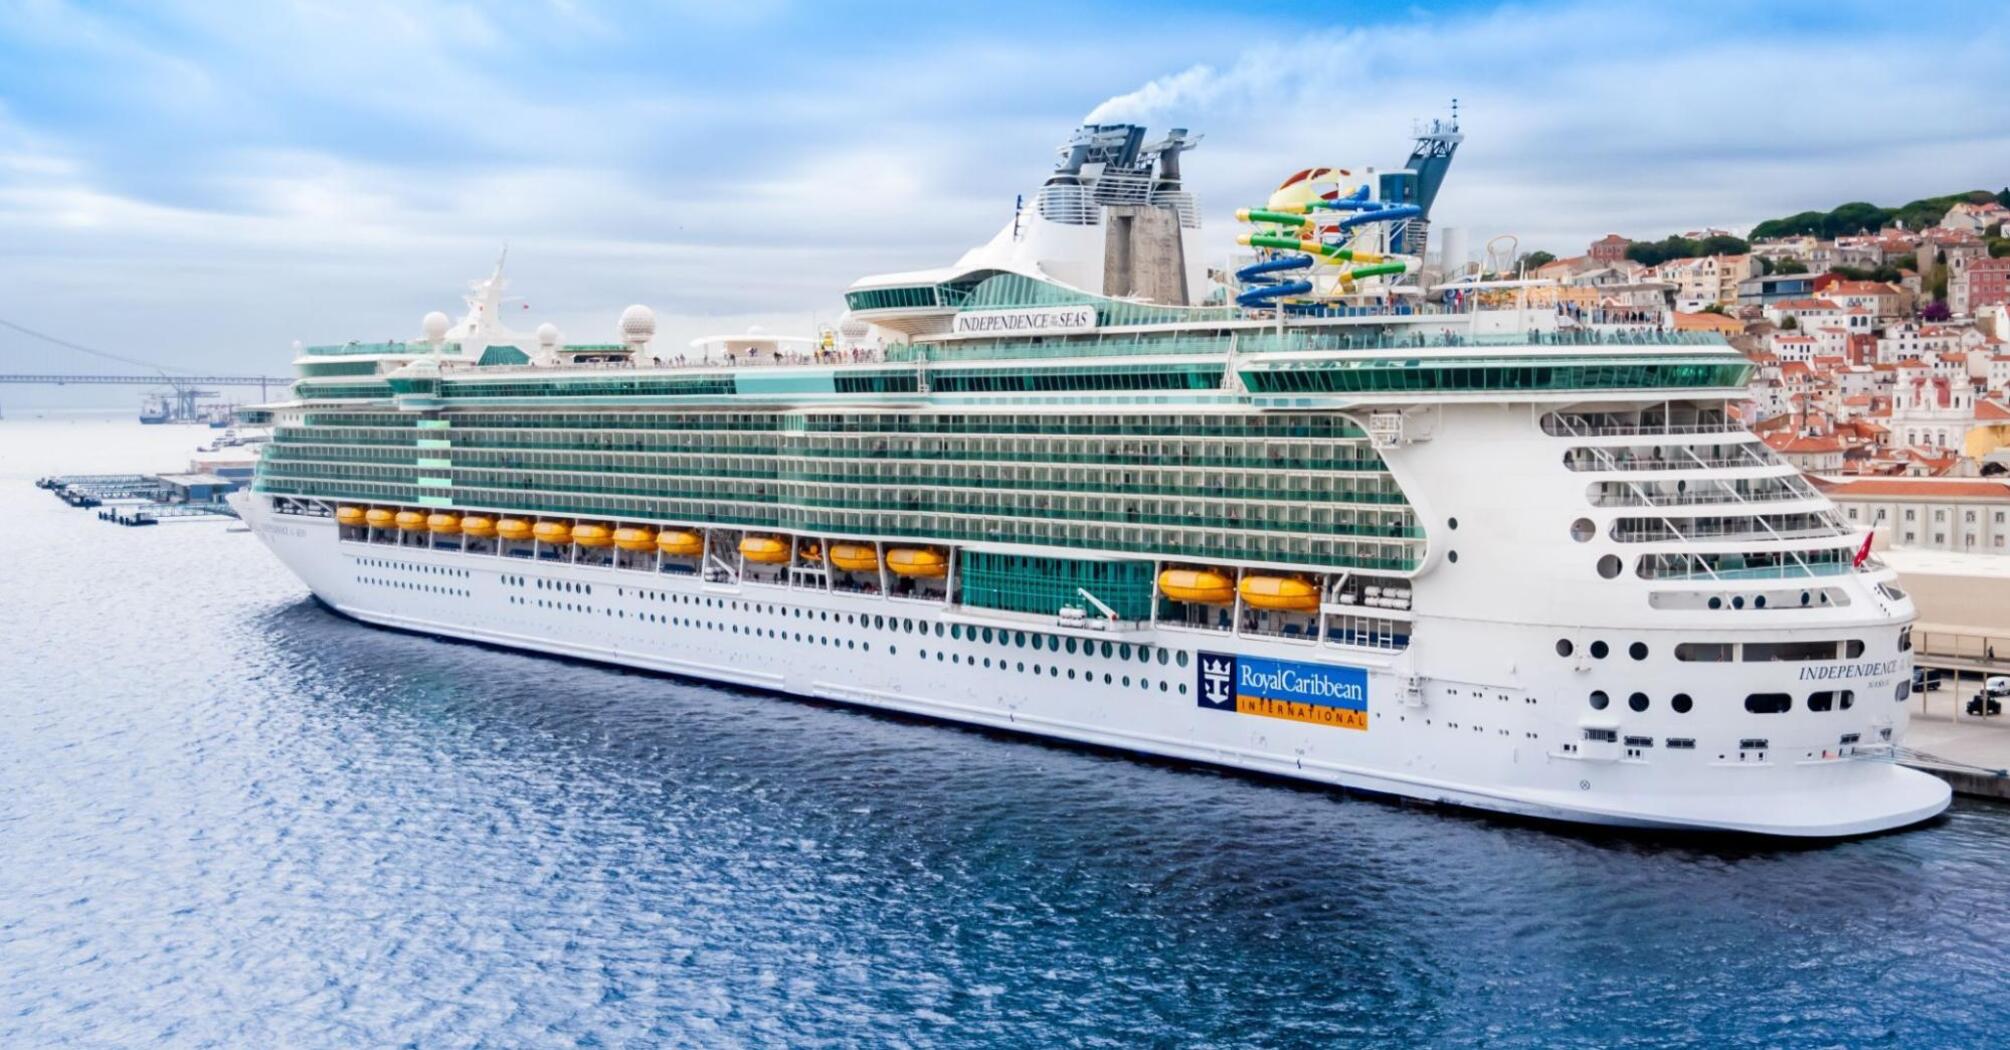 Royal Caribbean in all its glory